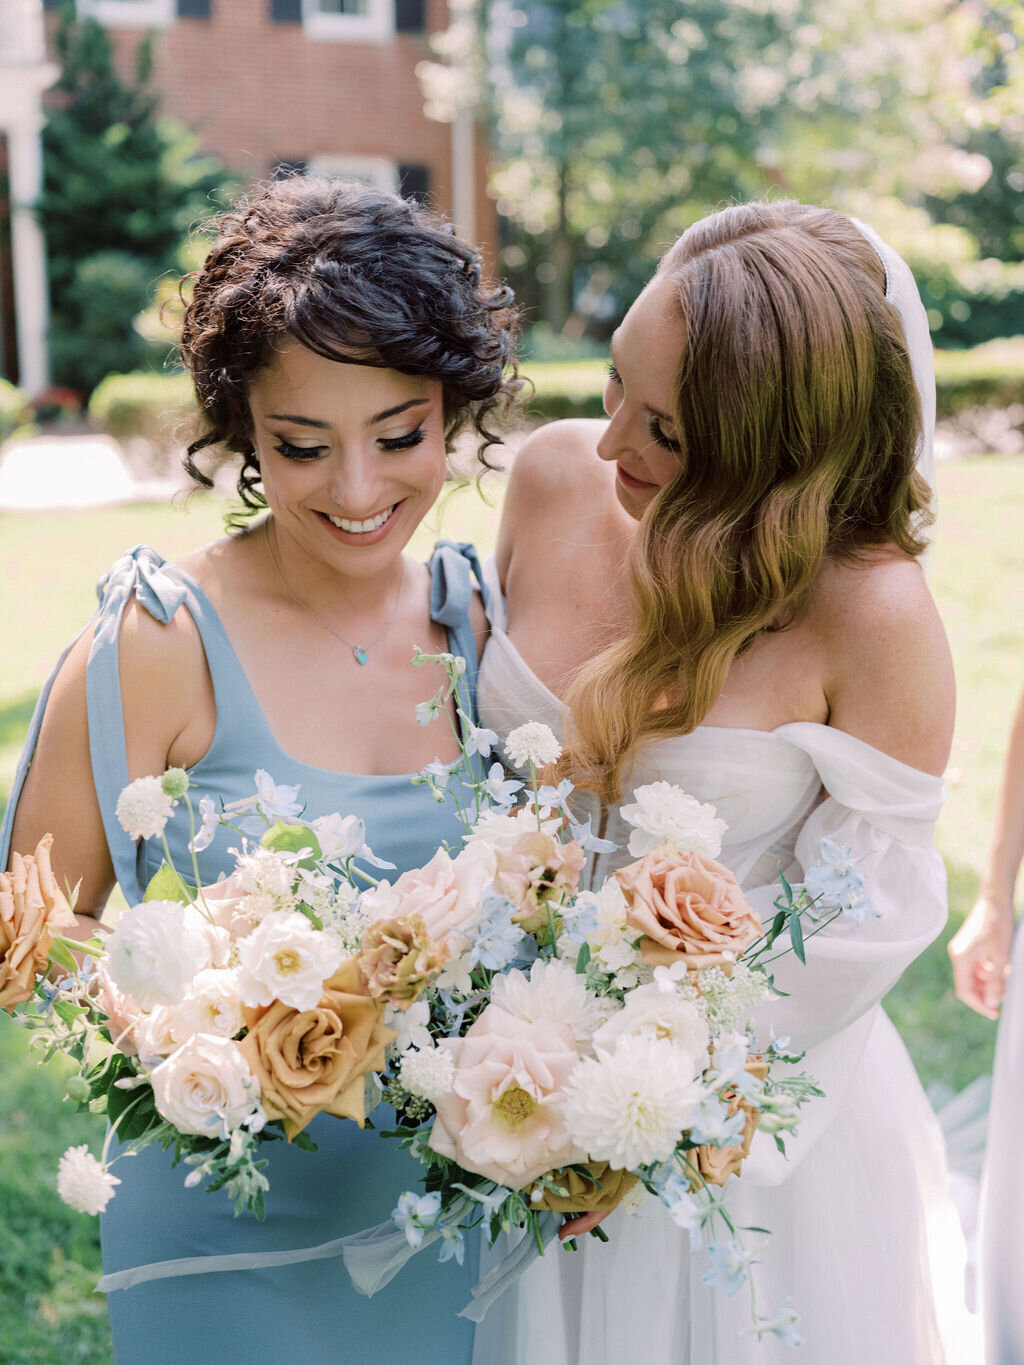 Bride and bridesmaid in blue dresses holding bouquets of peach garden rose, white dahlia, toffee roses, white hydrangea, light blue delphinium and brown lisianthus.